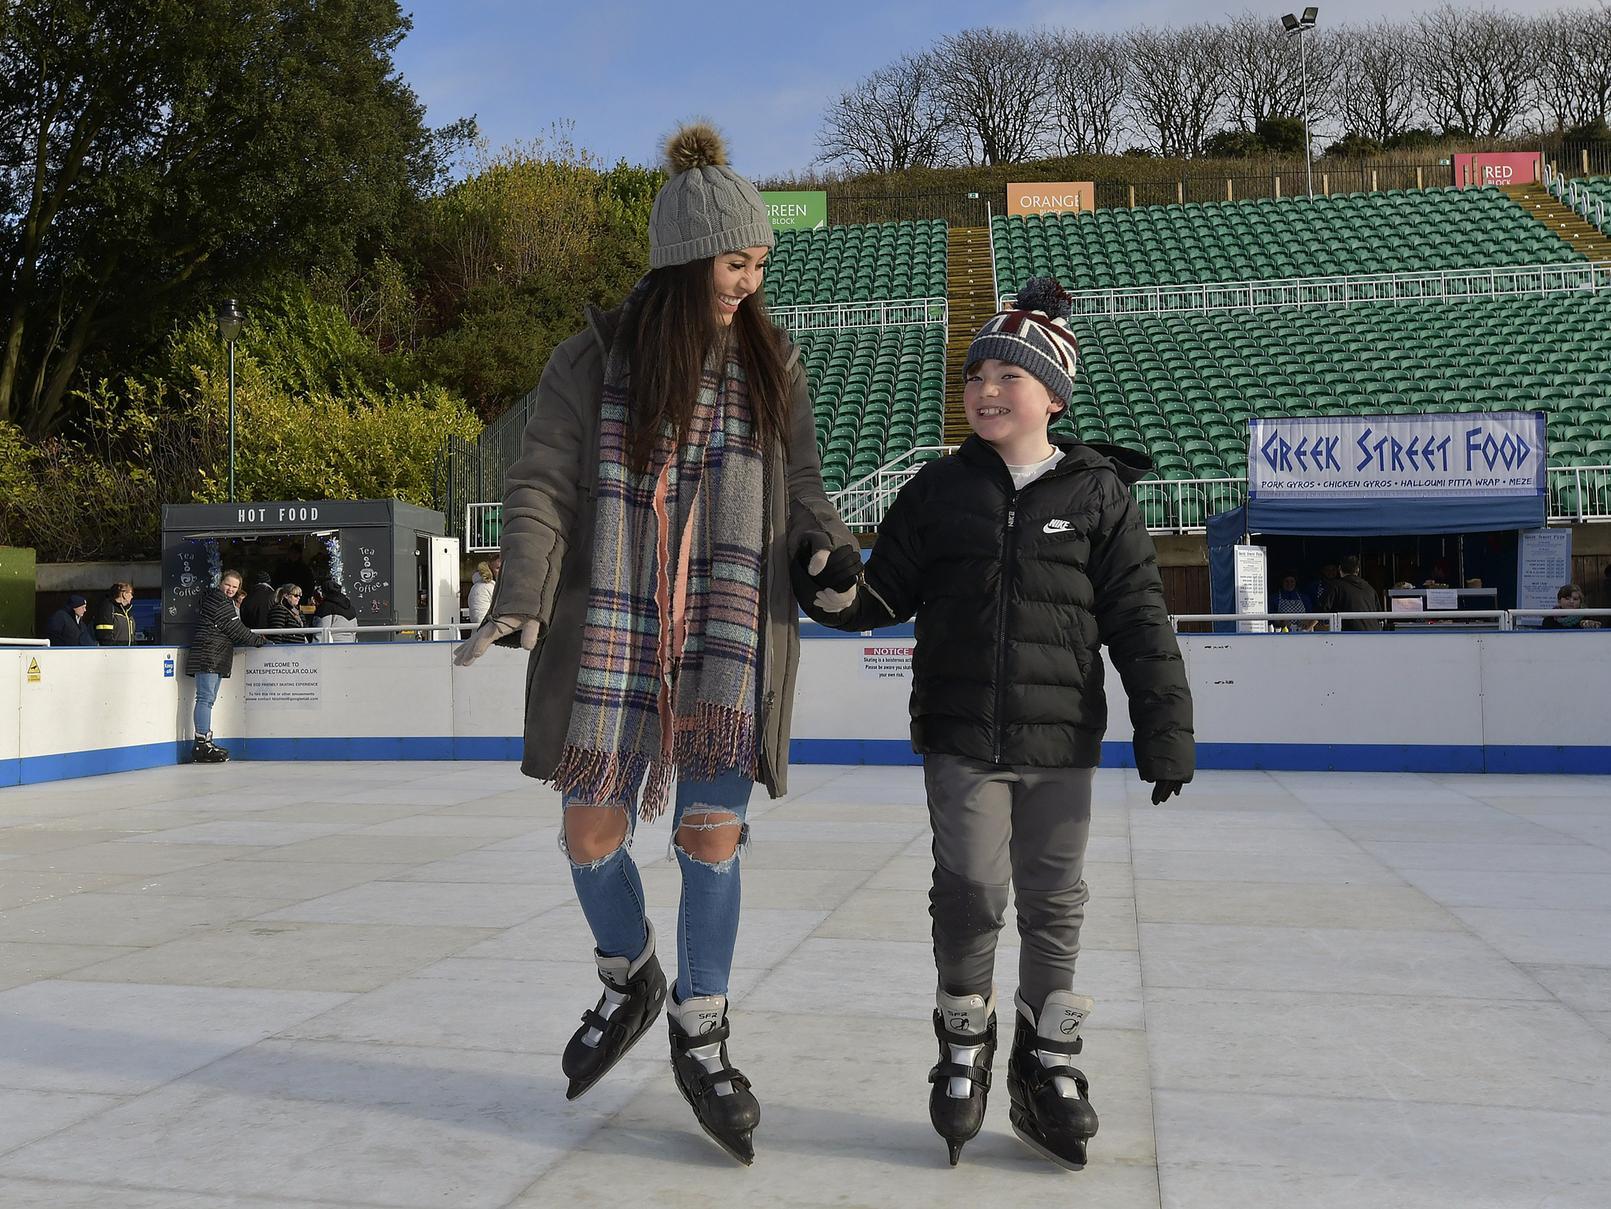 Danielle and William Chapman enjoy an ice rink adventure.